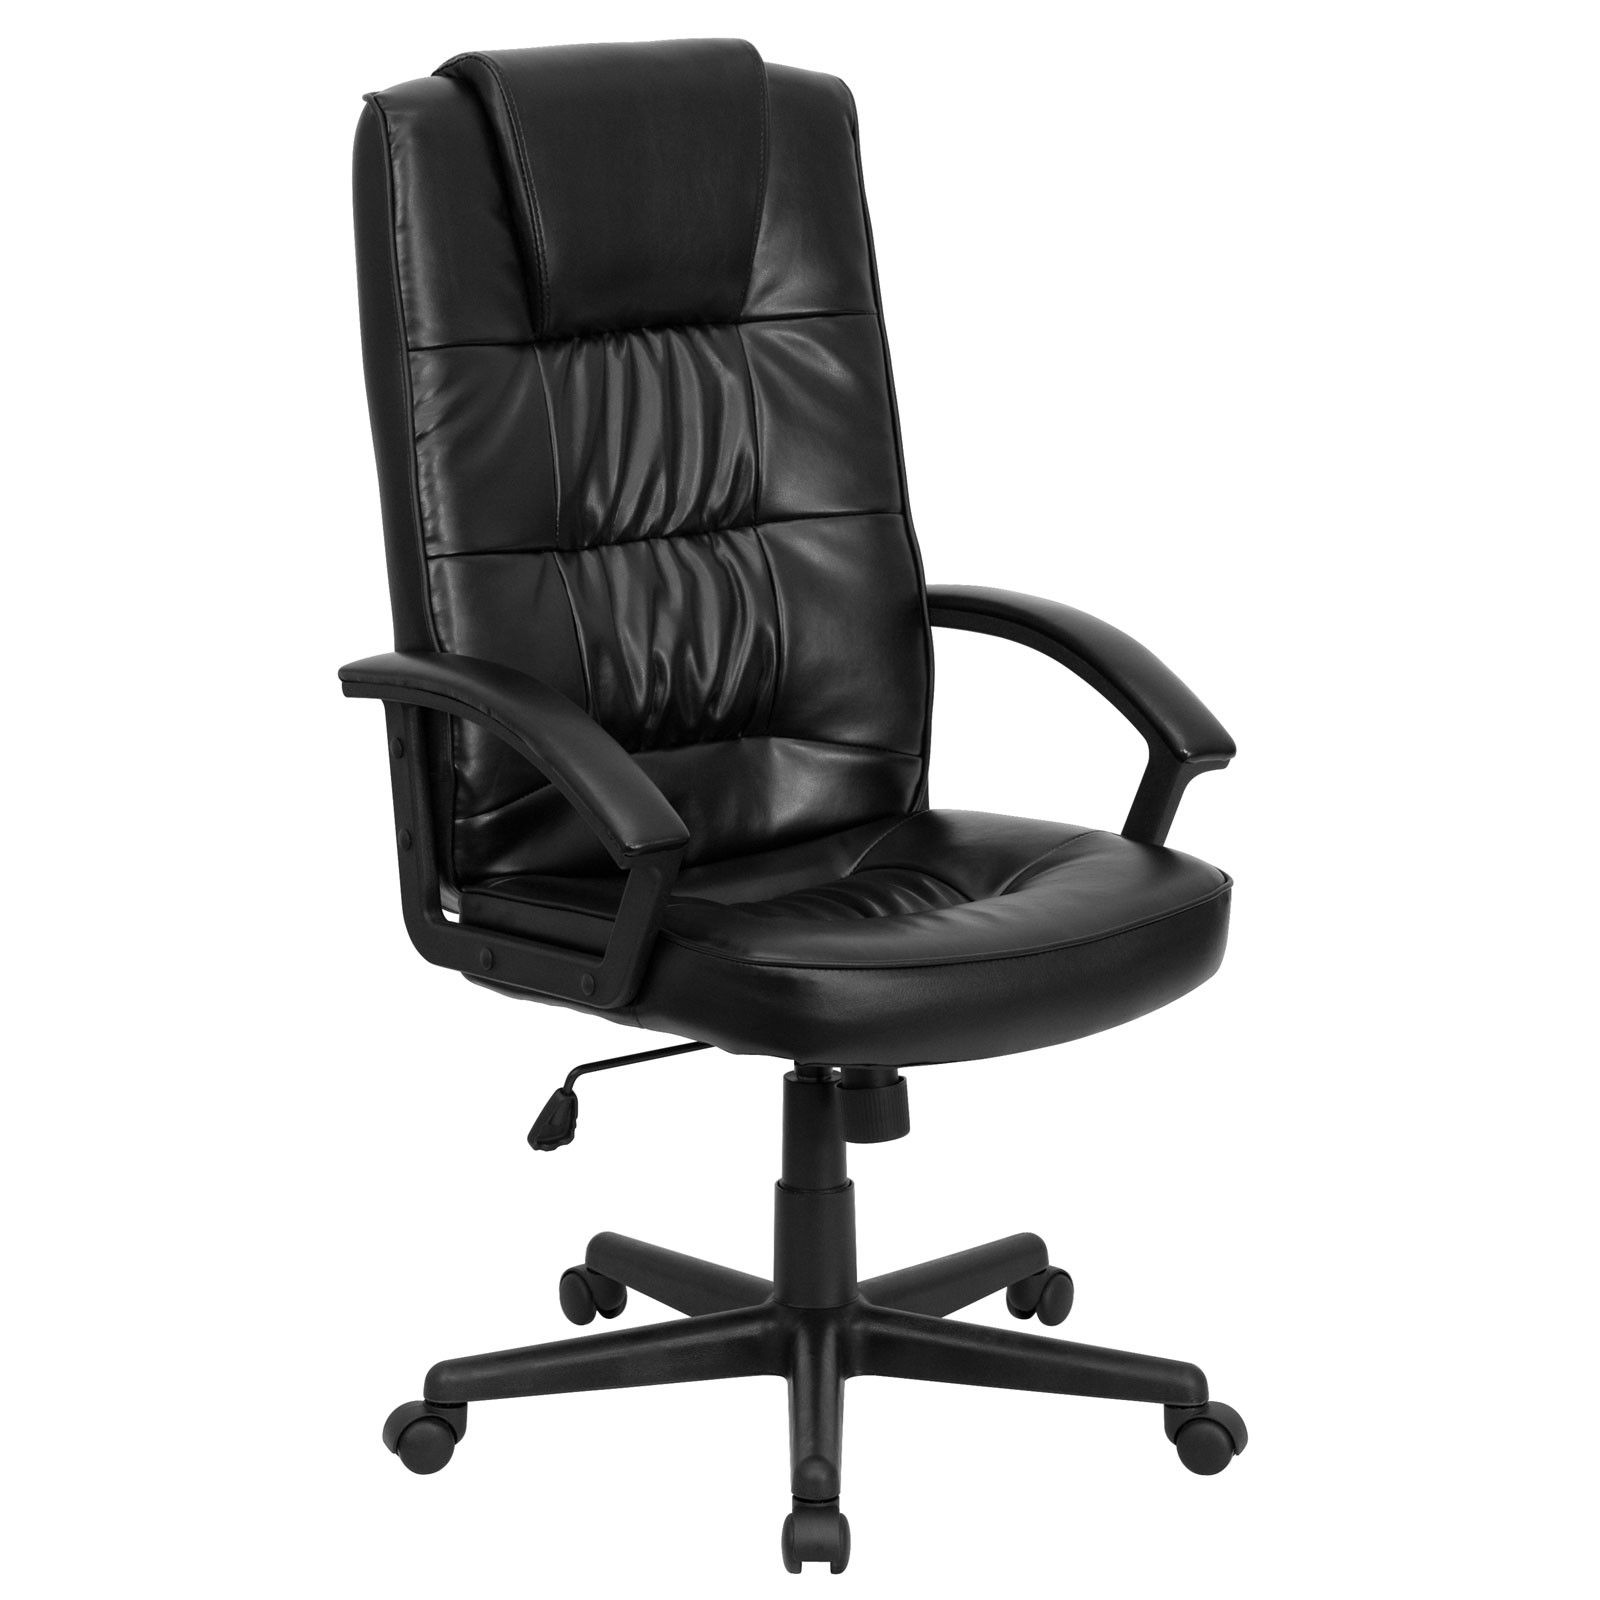 Best ideas about Executive Office Chair
. Save or Pin High Back Executive fice Chair in fice Chairs Now.